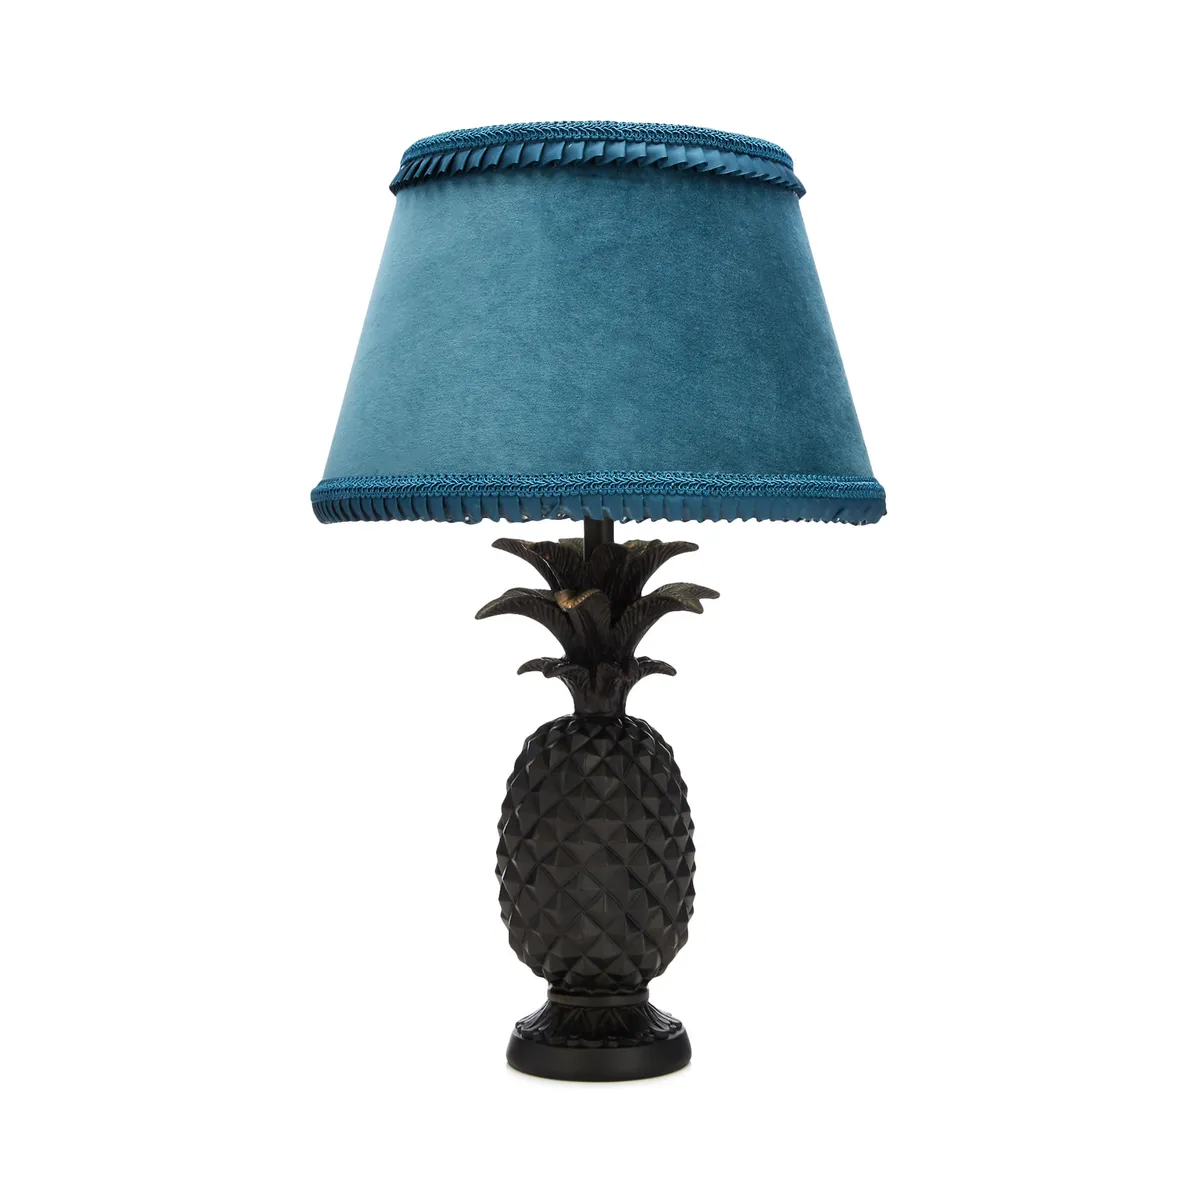 MW by Matthew Williamson Black Pineapple Shaped Table Lamp